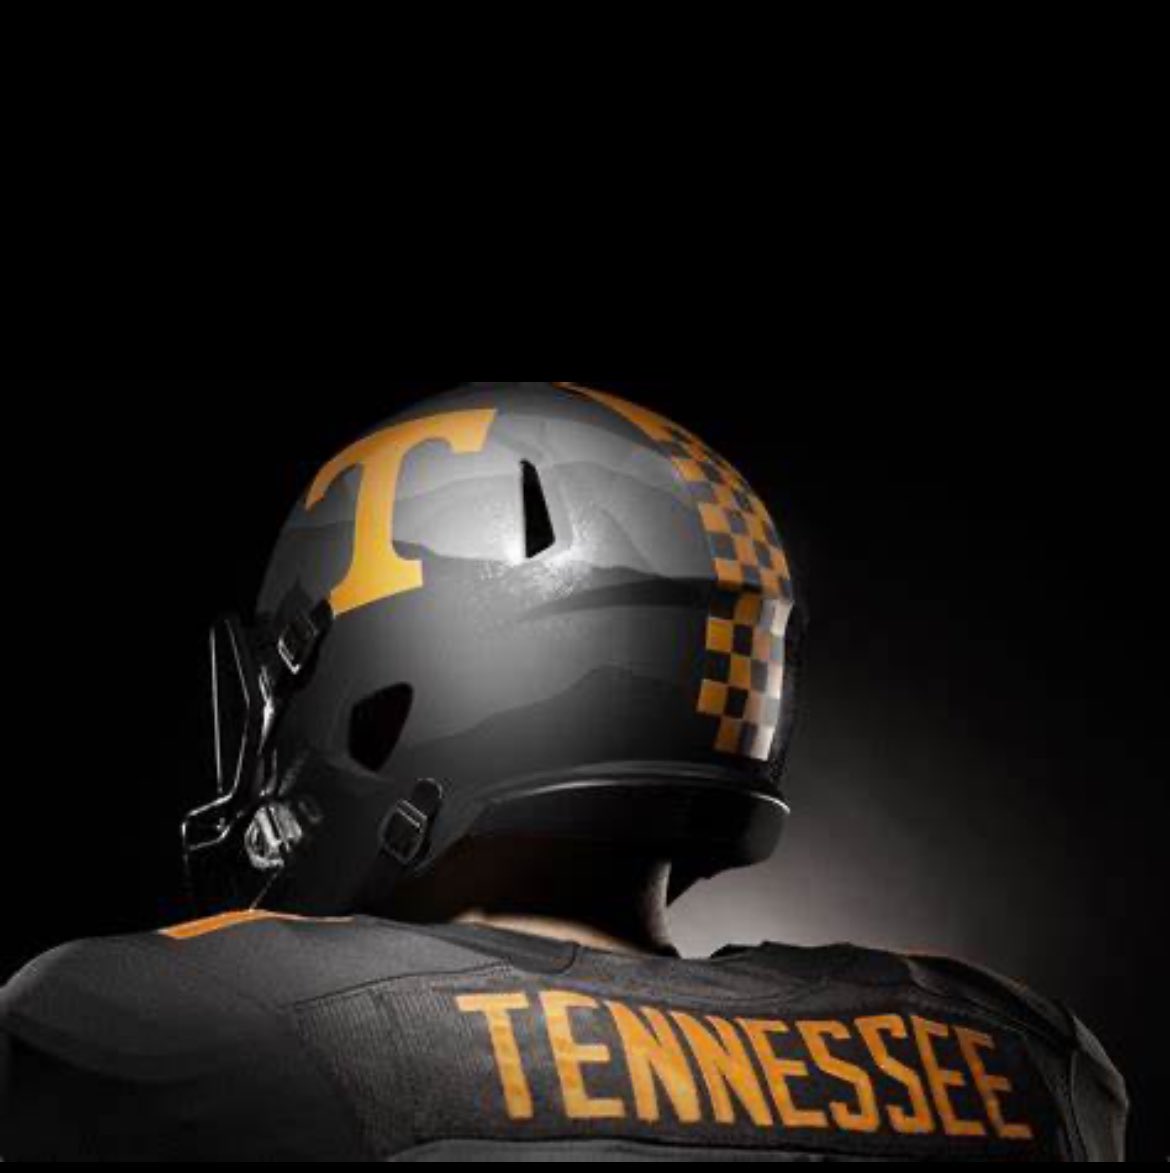 Want to thank @CoachHalzle from @Vol_Football for stopping by The Creek to see our guys!